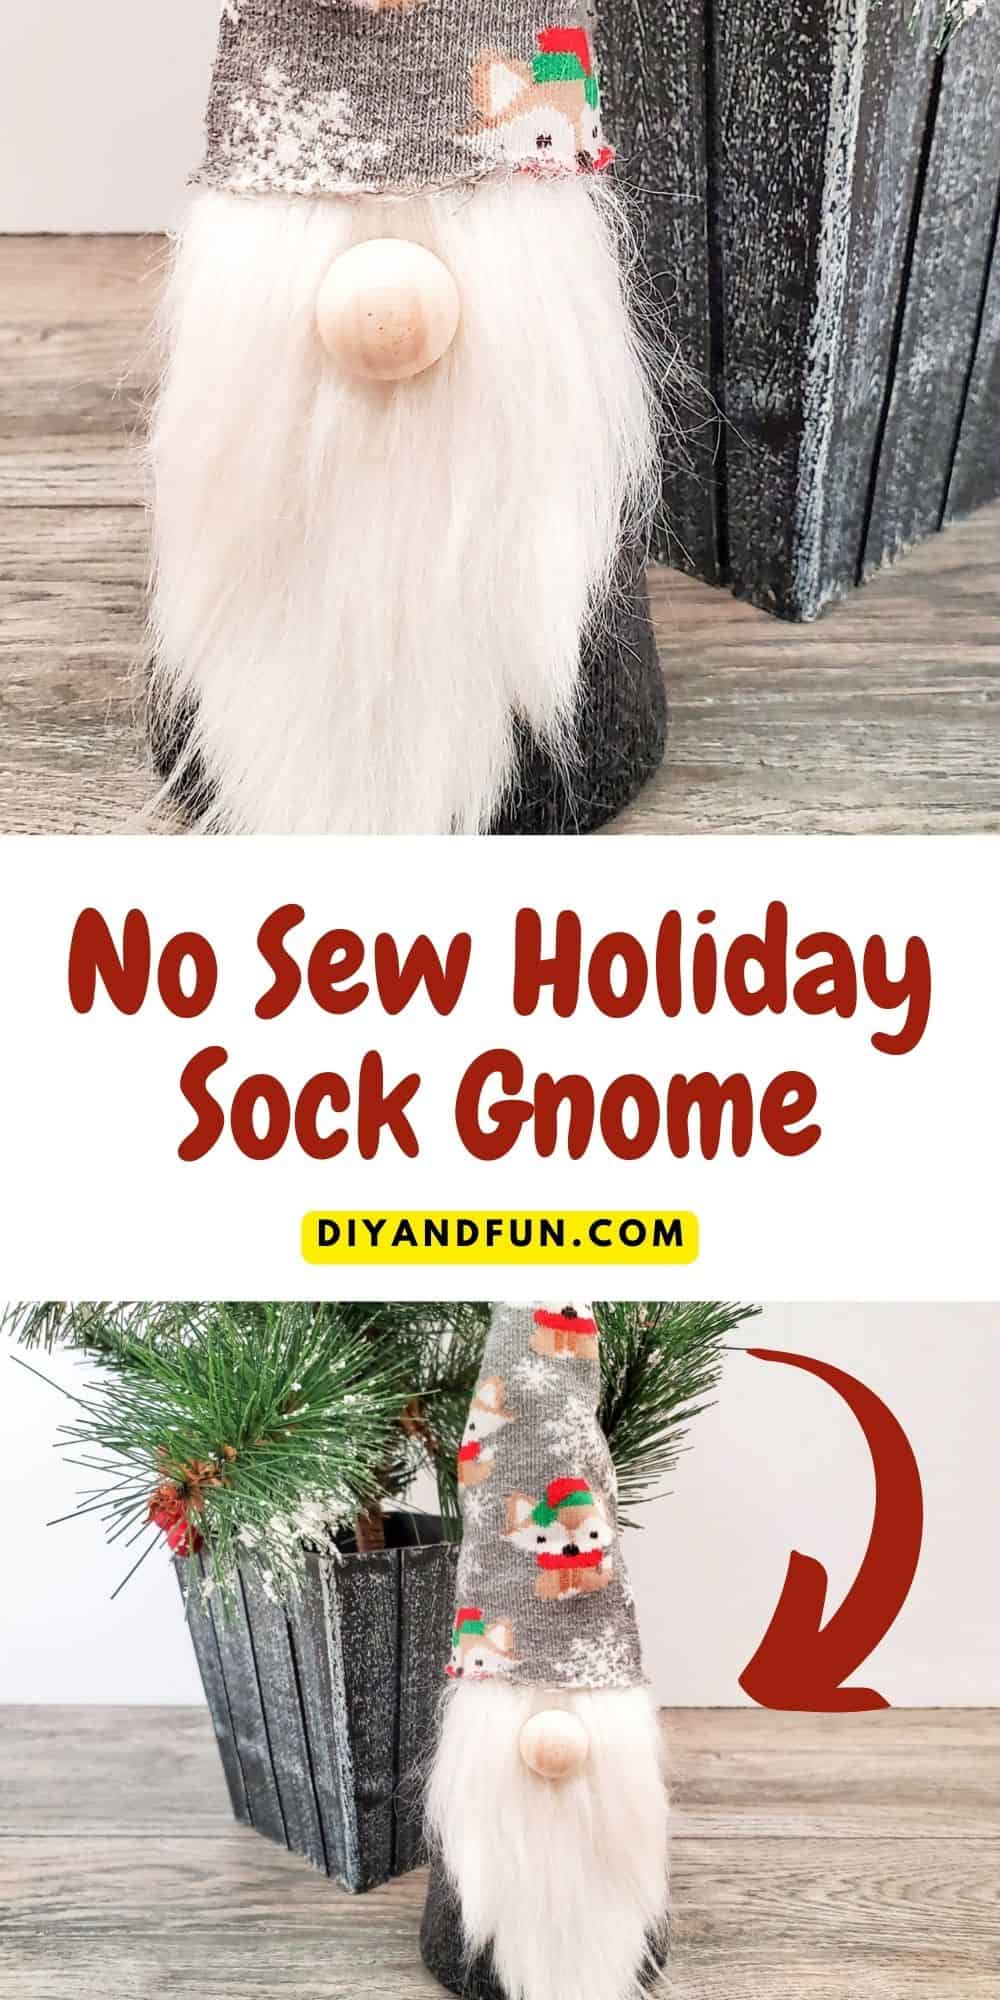 No Sew Holiday Sock Gnome, a simple homemade craft diy Christmas holiday project. Most ages, Dollar Store materials. 